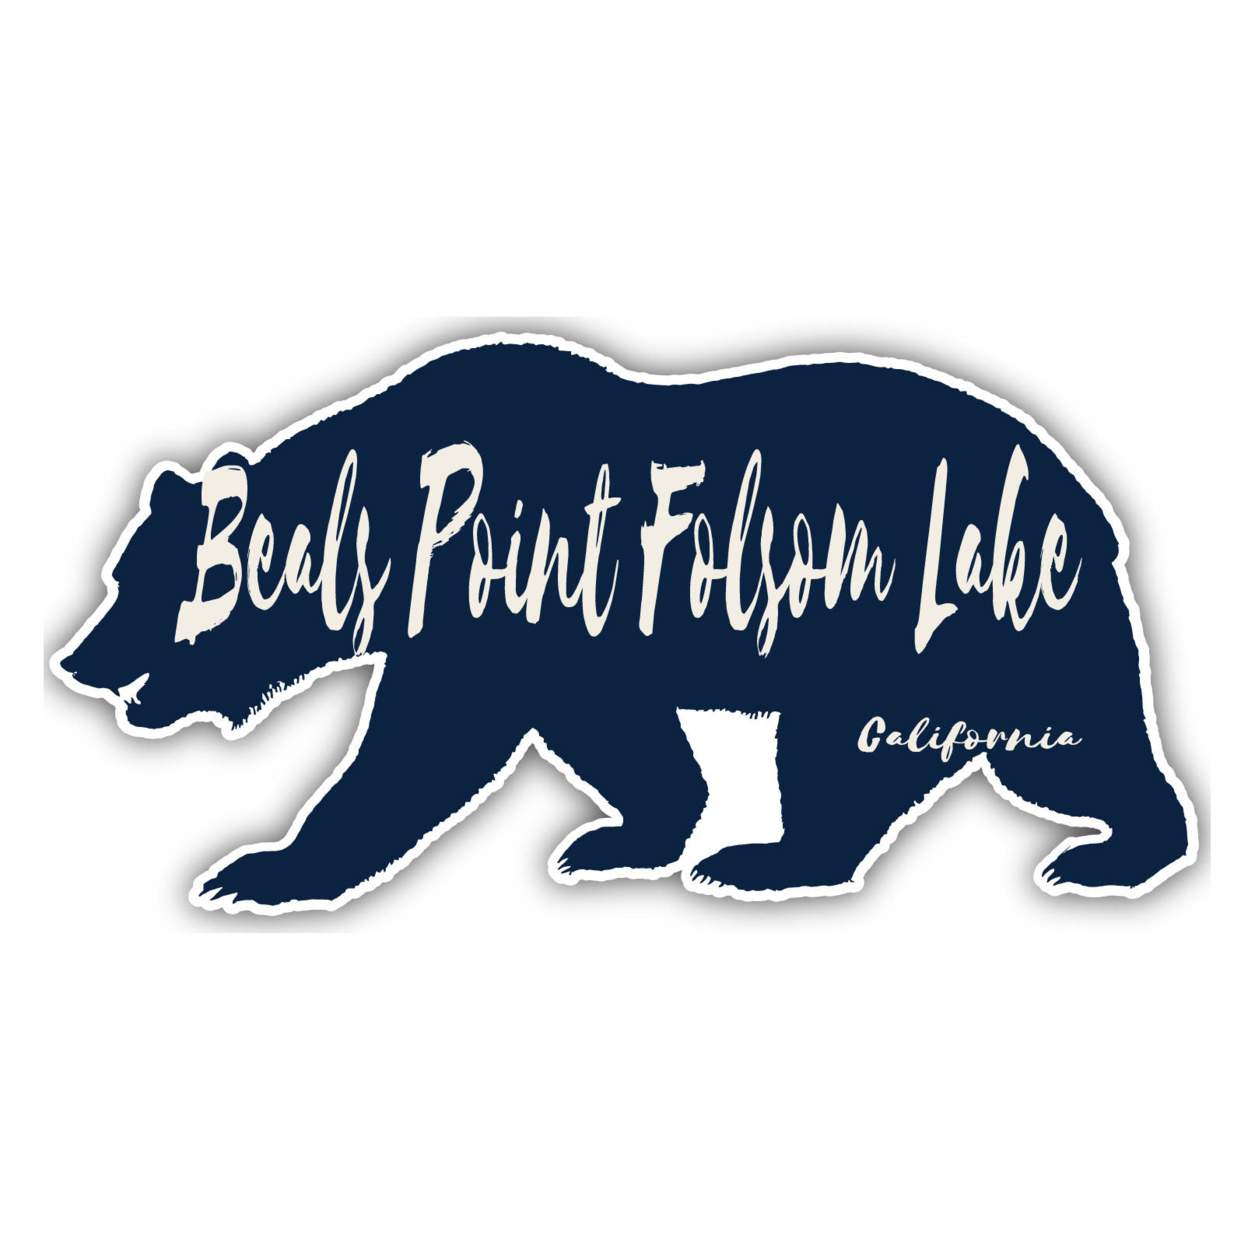 Beals Point Folsom Lake California Souvenir Decorative Stickers (Choose Theme And Size) - 4-Pack, 2-Inch, Camp Life